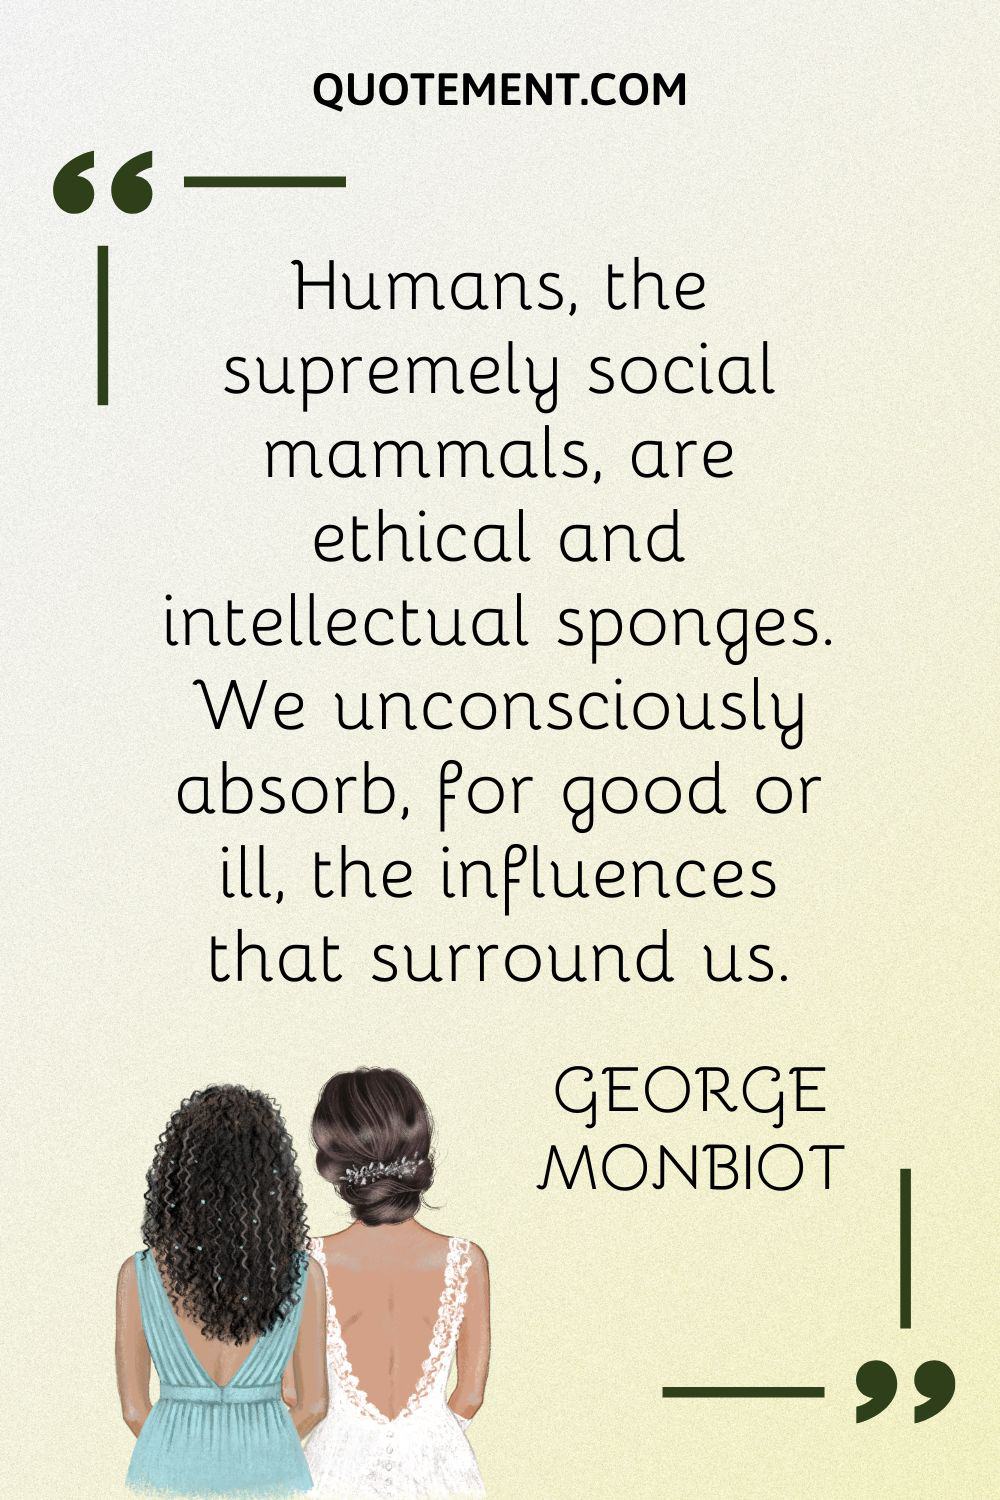 Humans, the supremely social mammals, are ethical and intellectual sponges